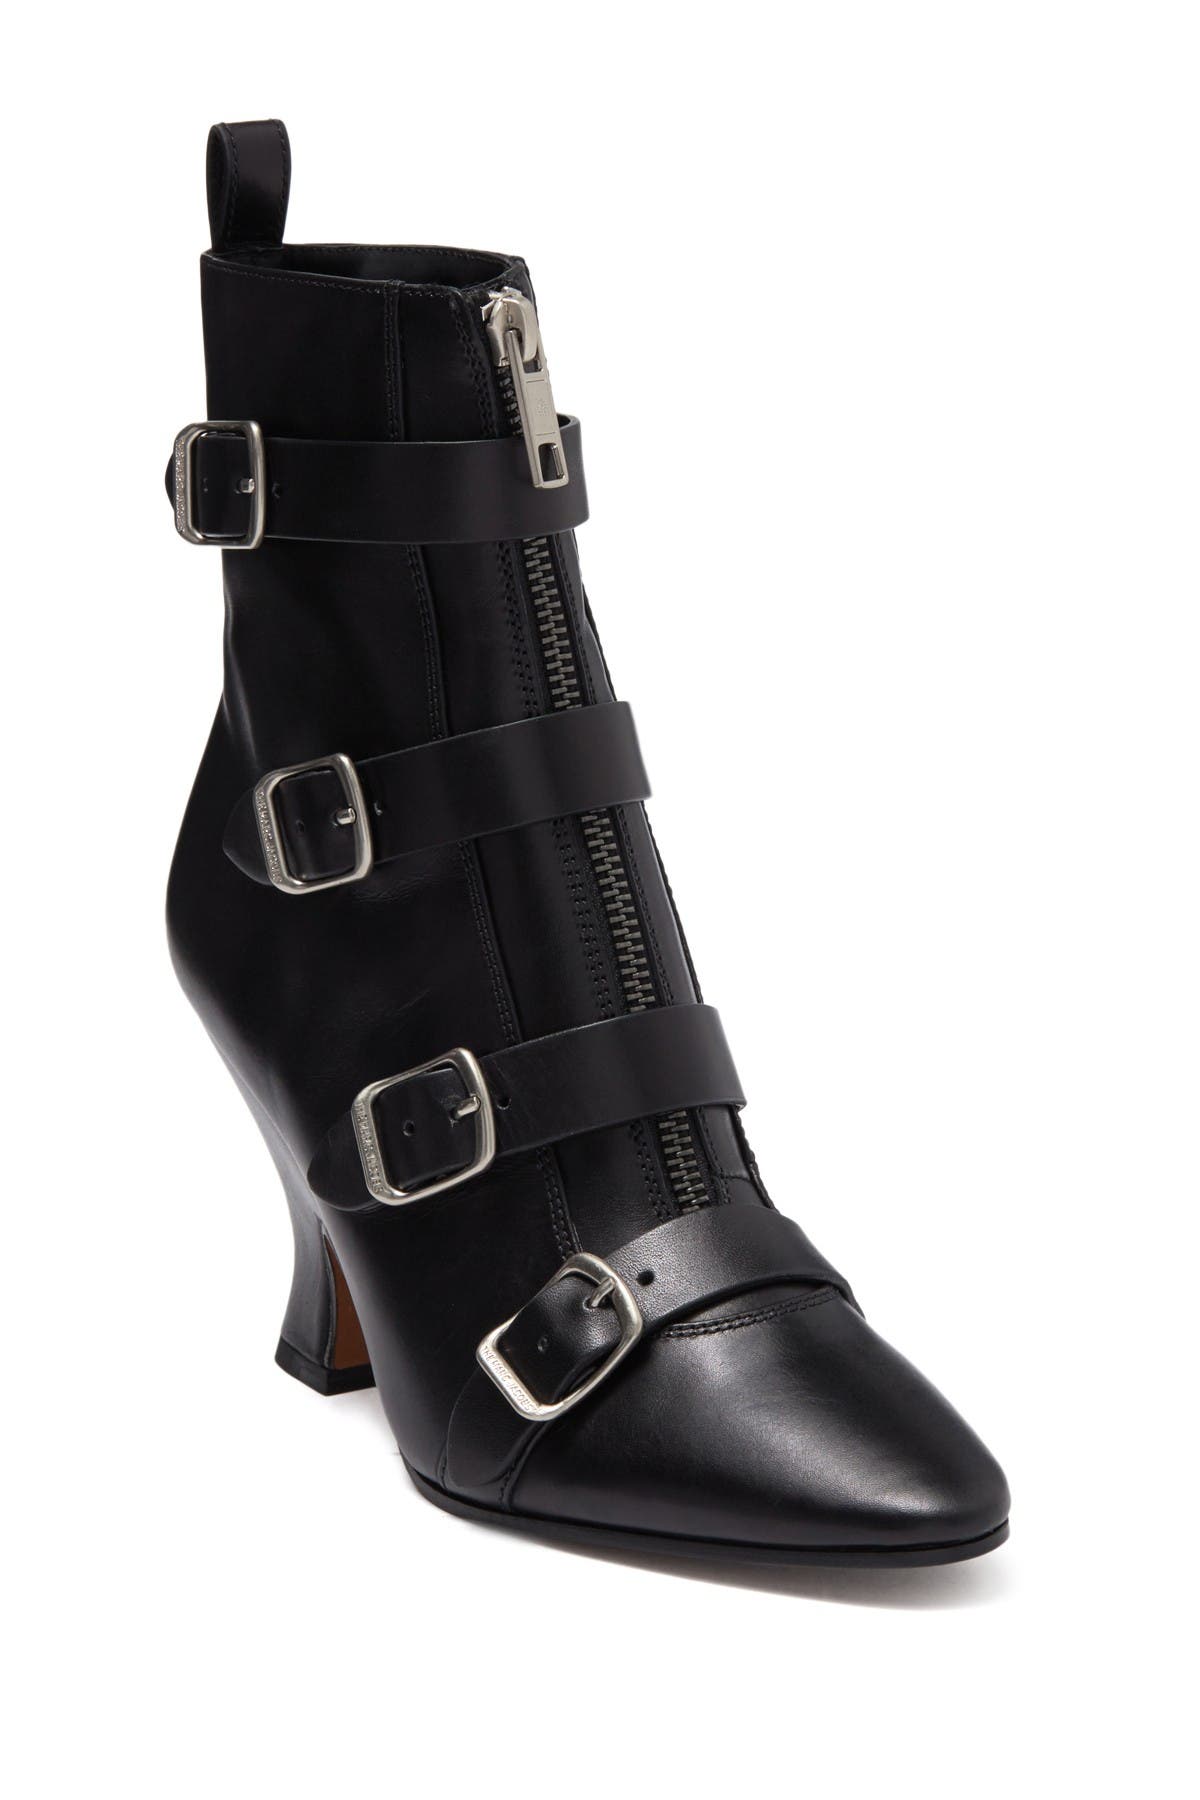 marc jacobs snakeskin boots